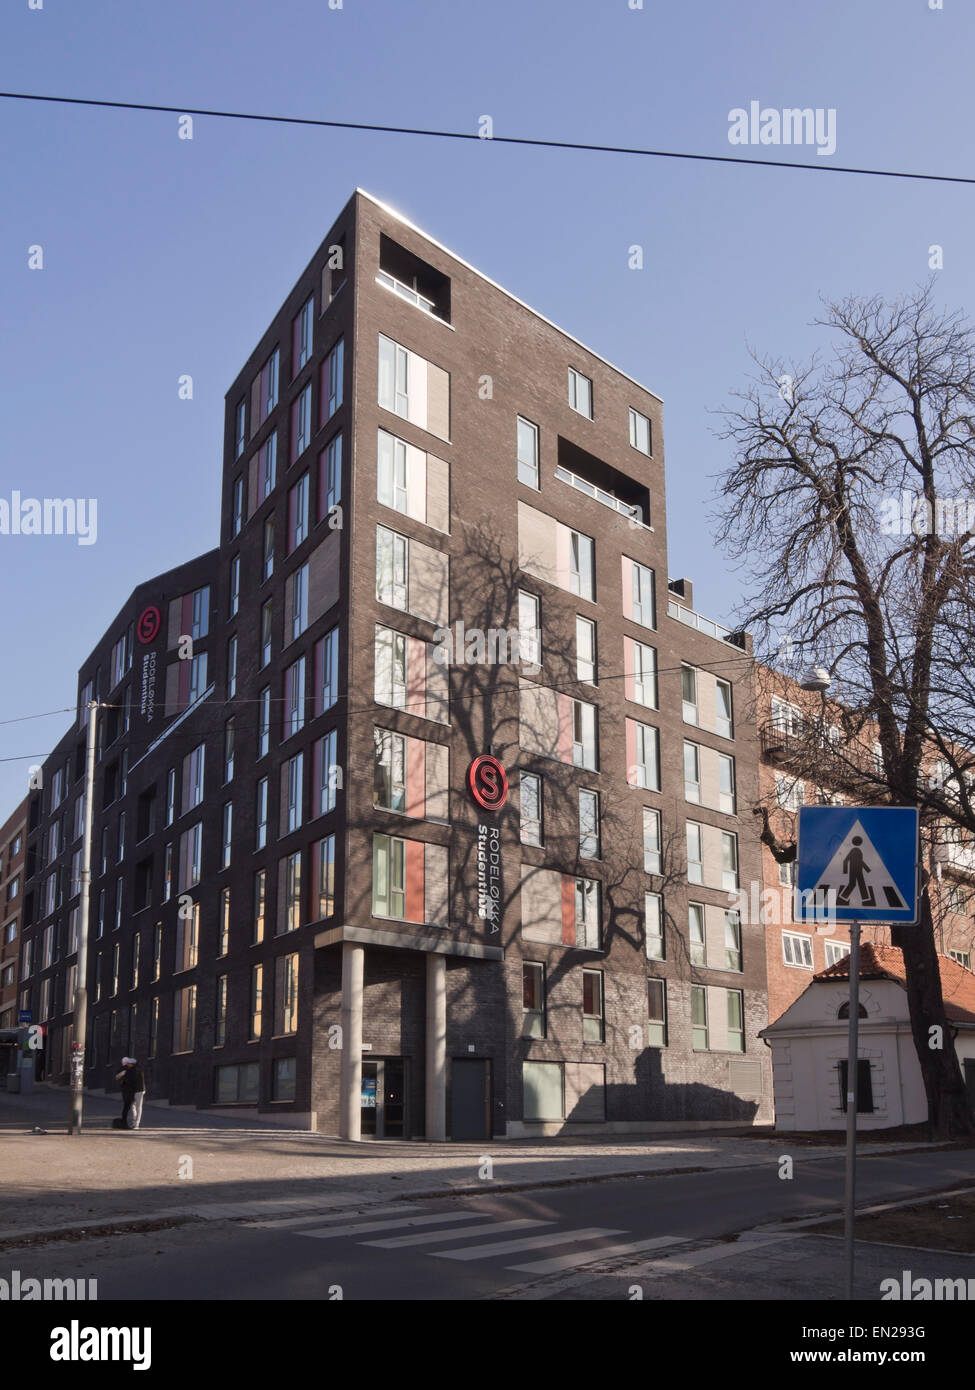 Trondheimsveien Oslo Norway, Sofienberg apartment block for students Stock Photo